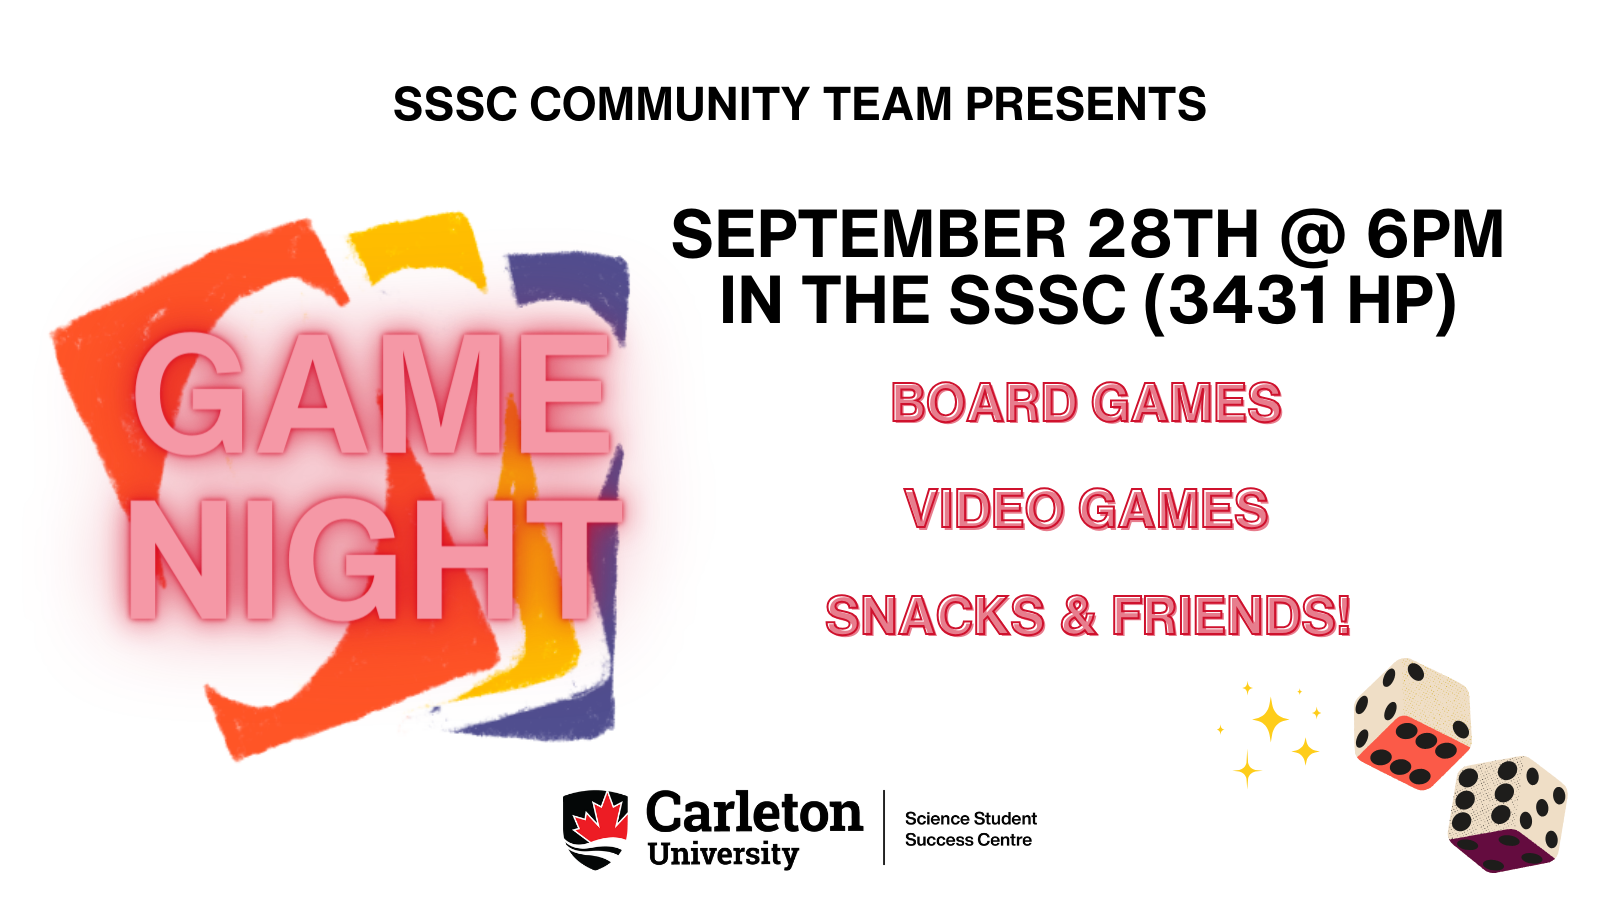 Poster with text. Text reads: SSSC Community Team Presents GAME NIGHT September 28th @ 6PM in the SSSC (3431 HP). Board Games Video Games Snacks & Friends! Carleton University | Science Student Success Centre. 